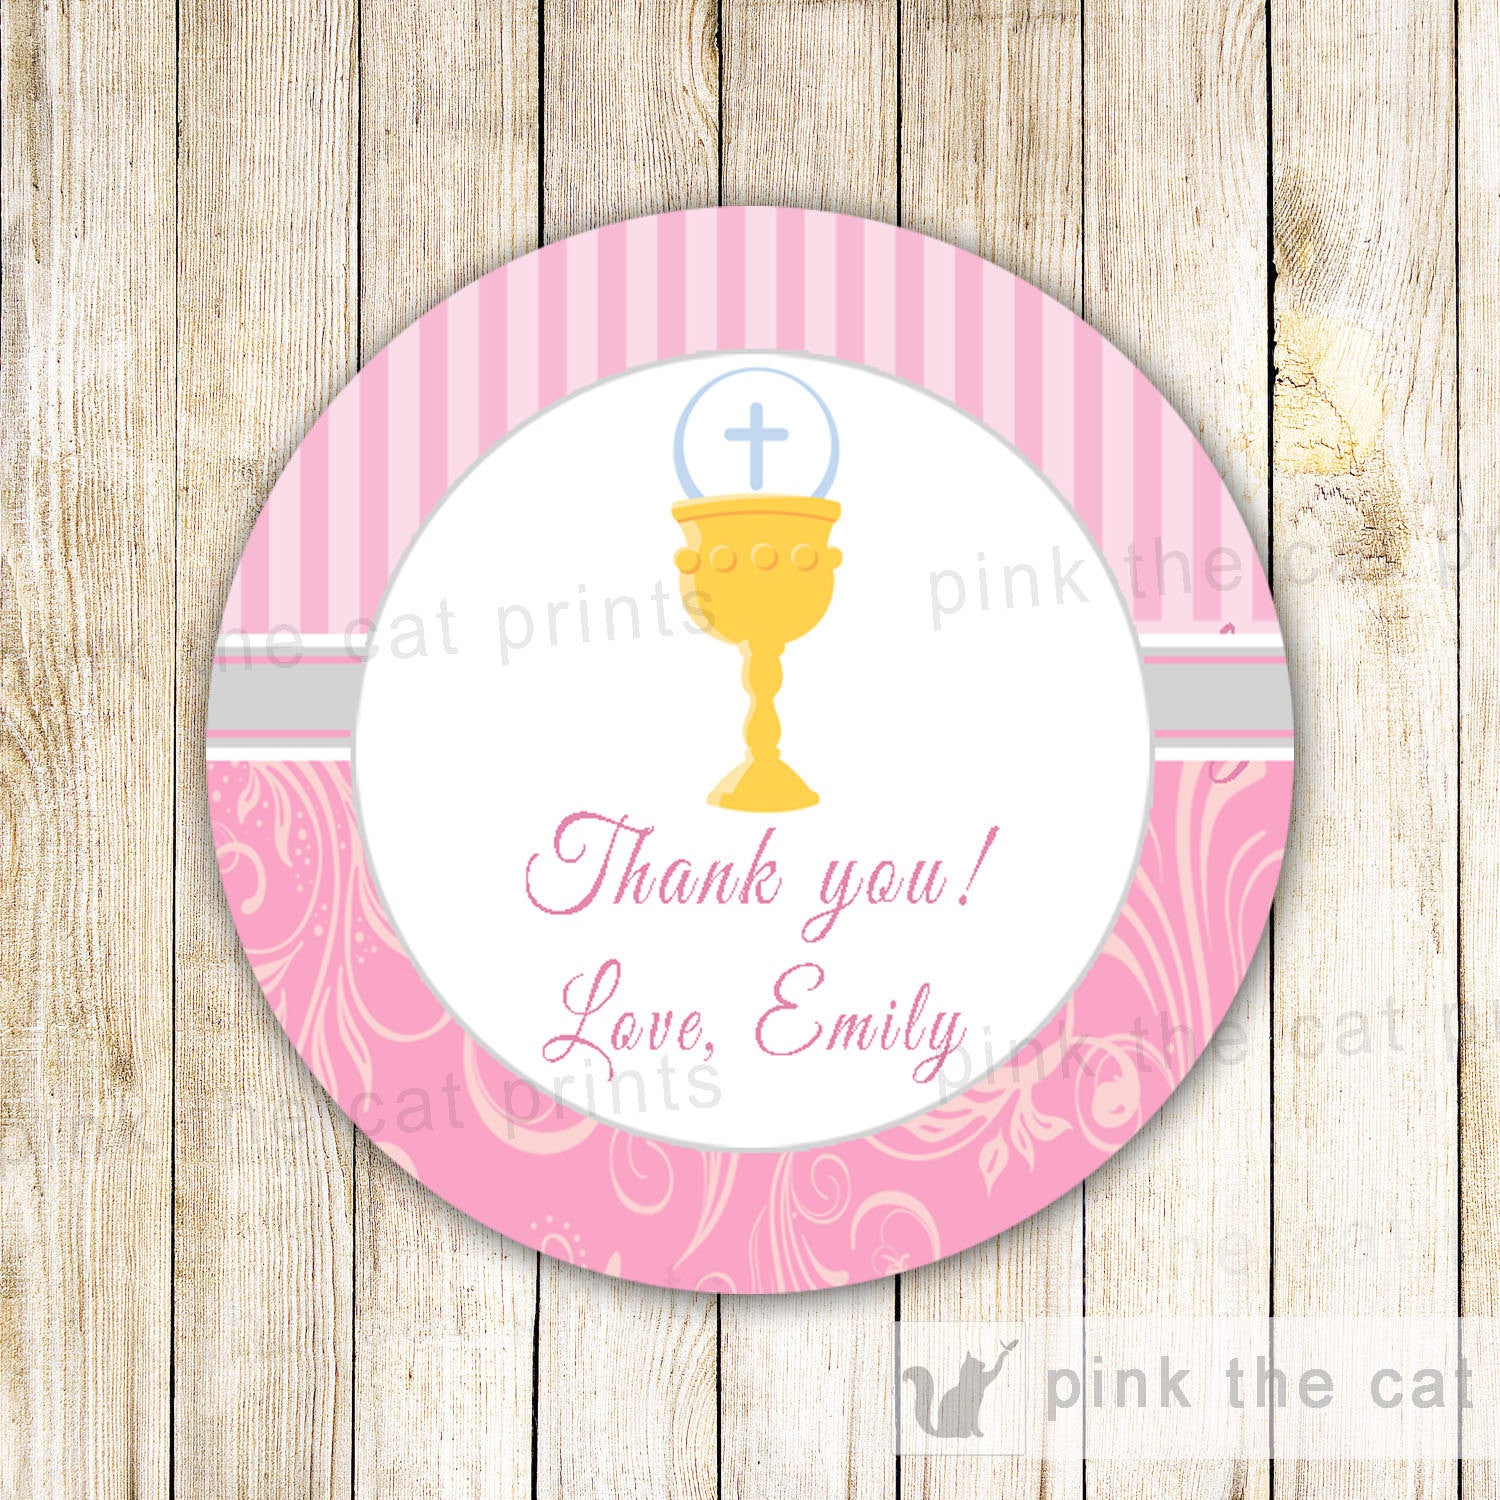 Chalice Girl First Holy Communion Favor Label Tag Sticker Pink Grey